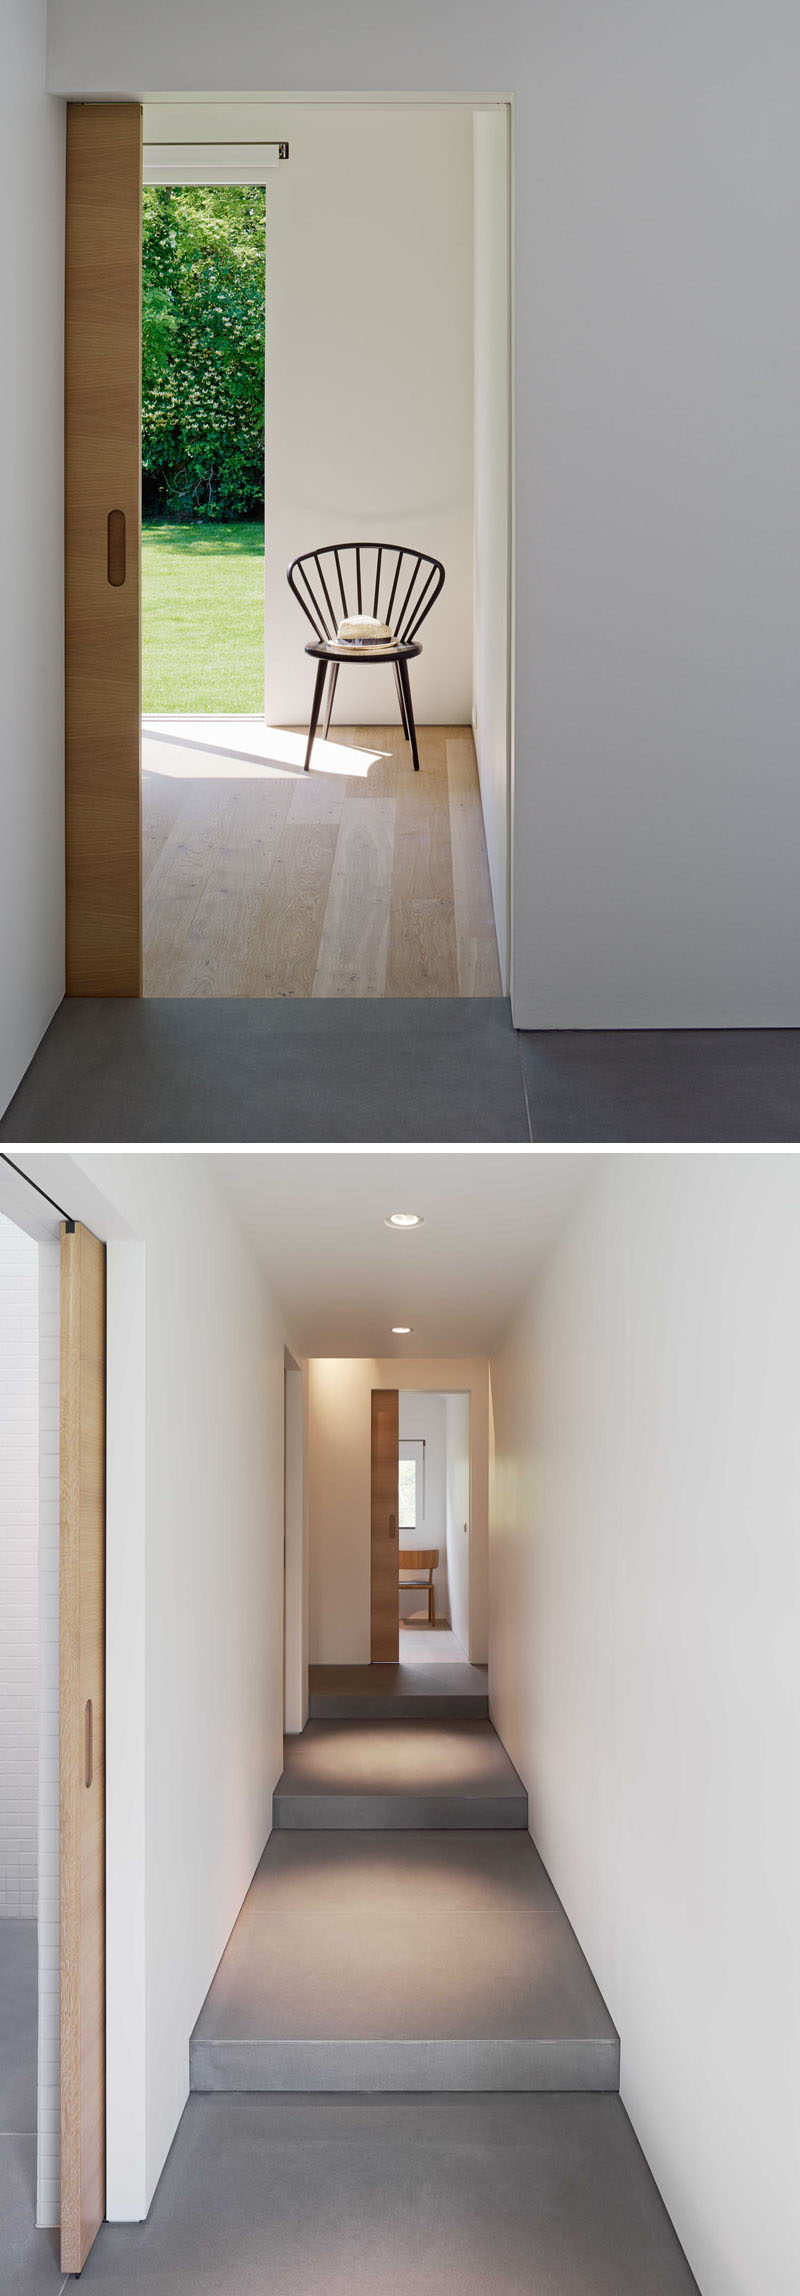 Throughout this modern house, wood pocket doors slide into the white walls, making the interior more streamlined.